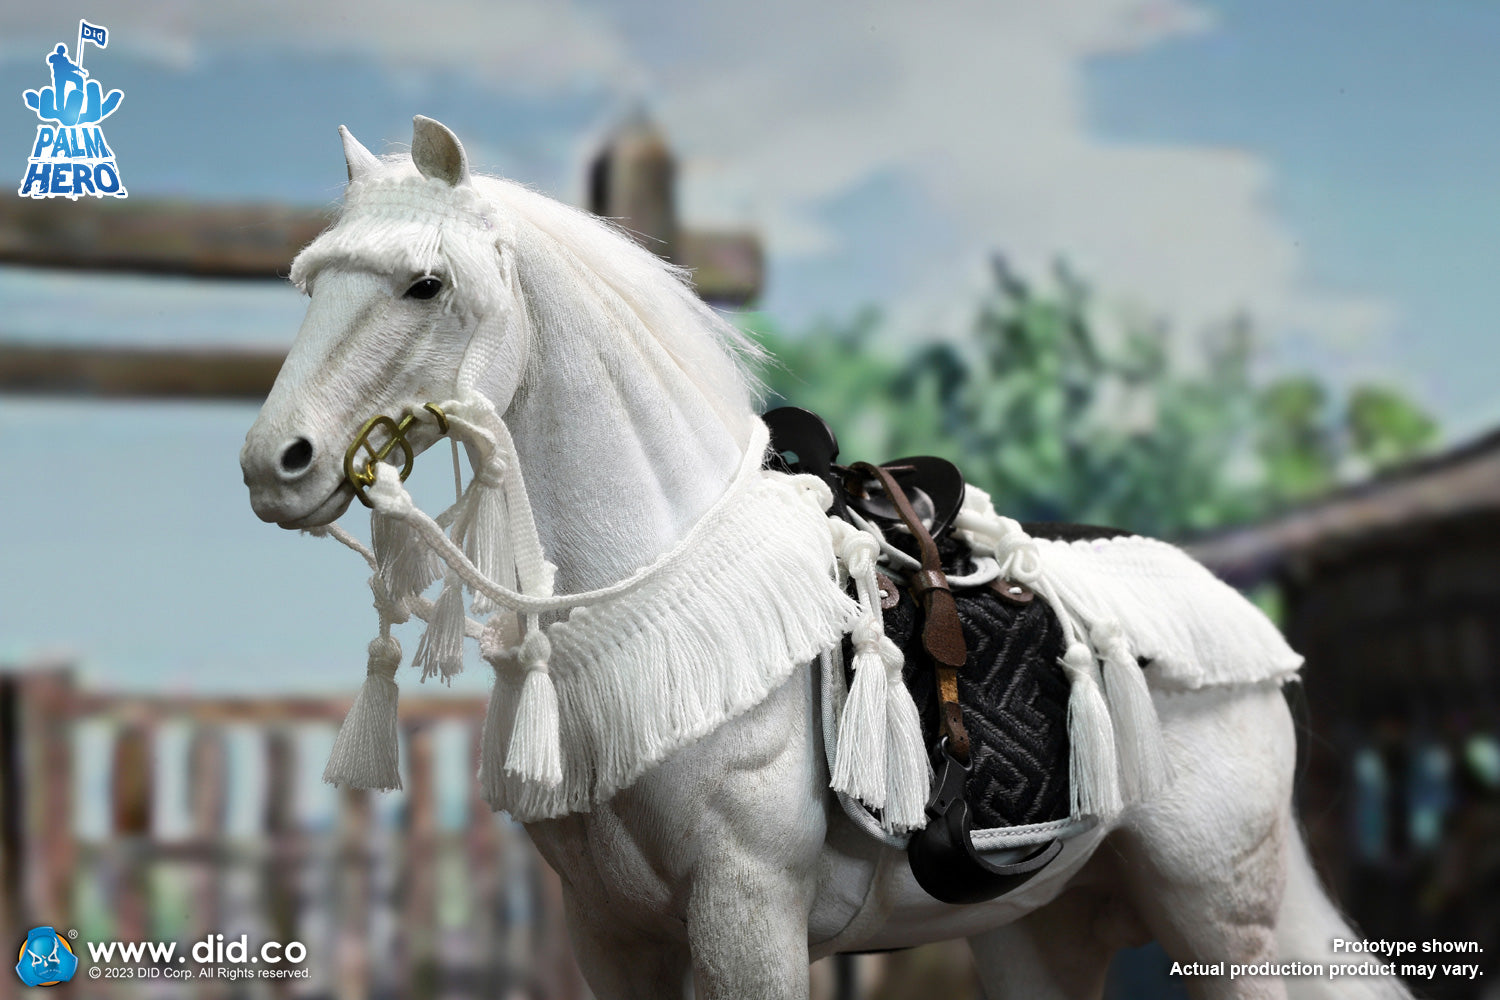 DiD - XH80021 - Palm Hero Series - White Horse (1/12 Scale) - Marvelous Toys